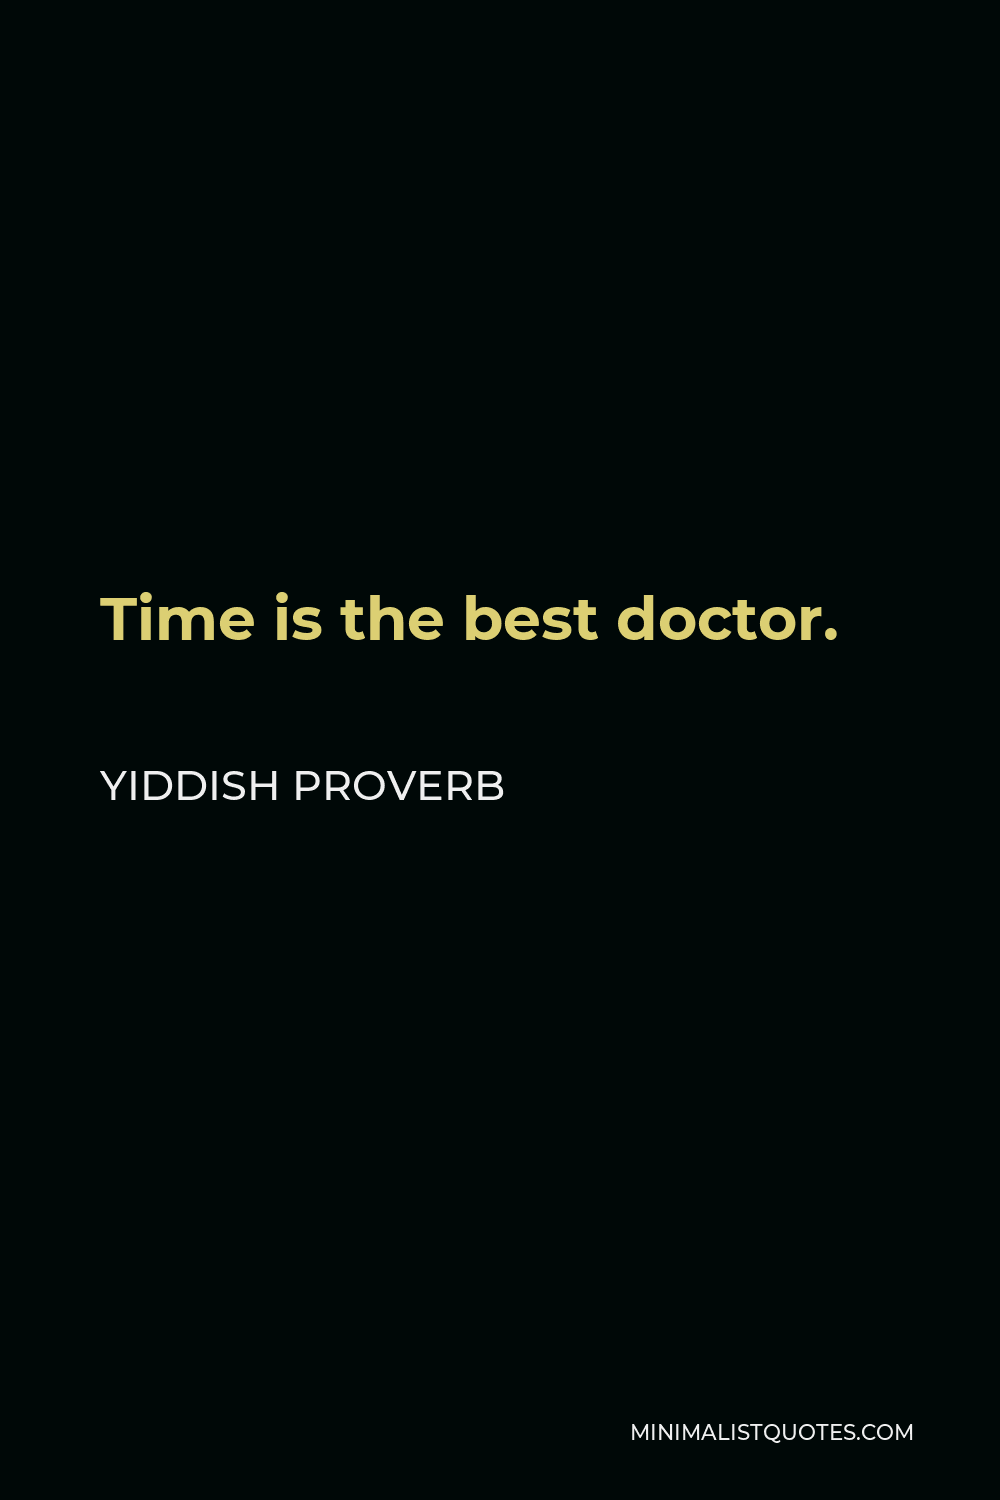 Yiddish Proverb Quote - Time is the best doctor.